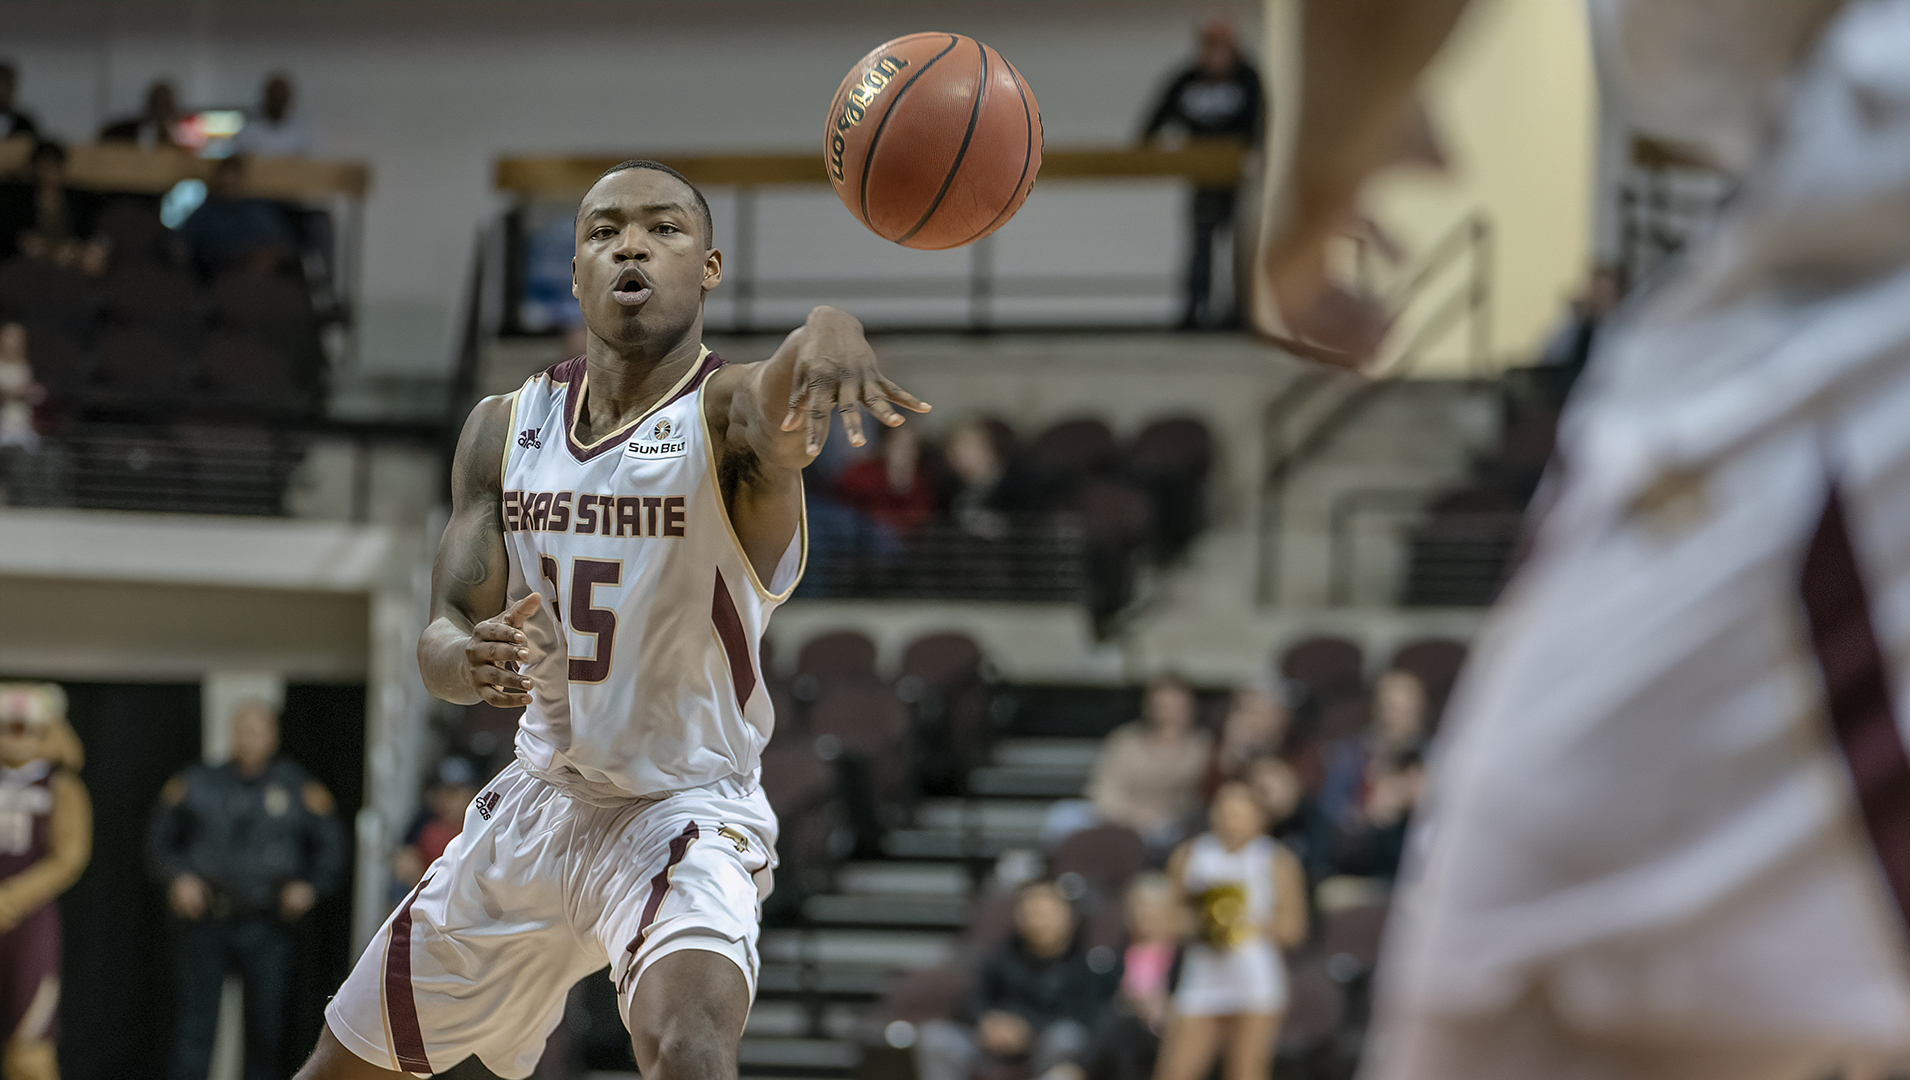 Jaylen Shead in a white and maroon Texas State jersey passes the ball to a teammate during a basketball game at Strahan Arena in San Marcos, Texas.